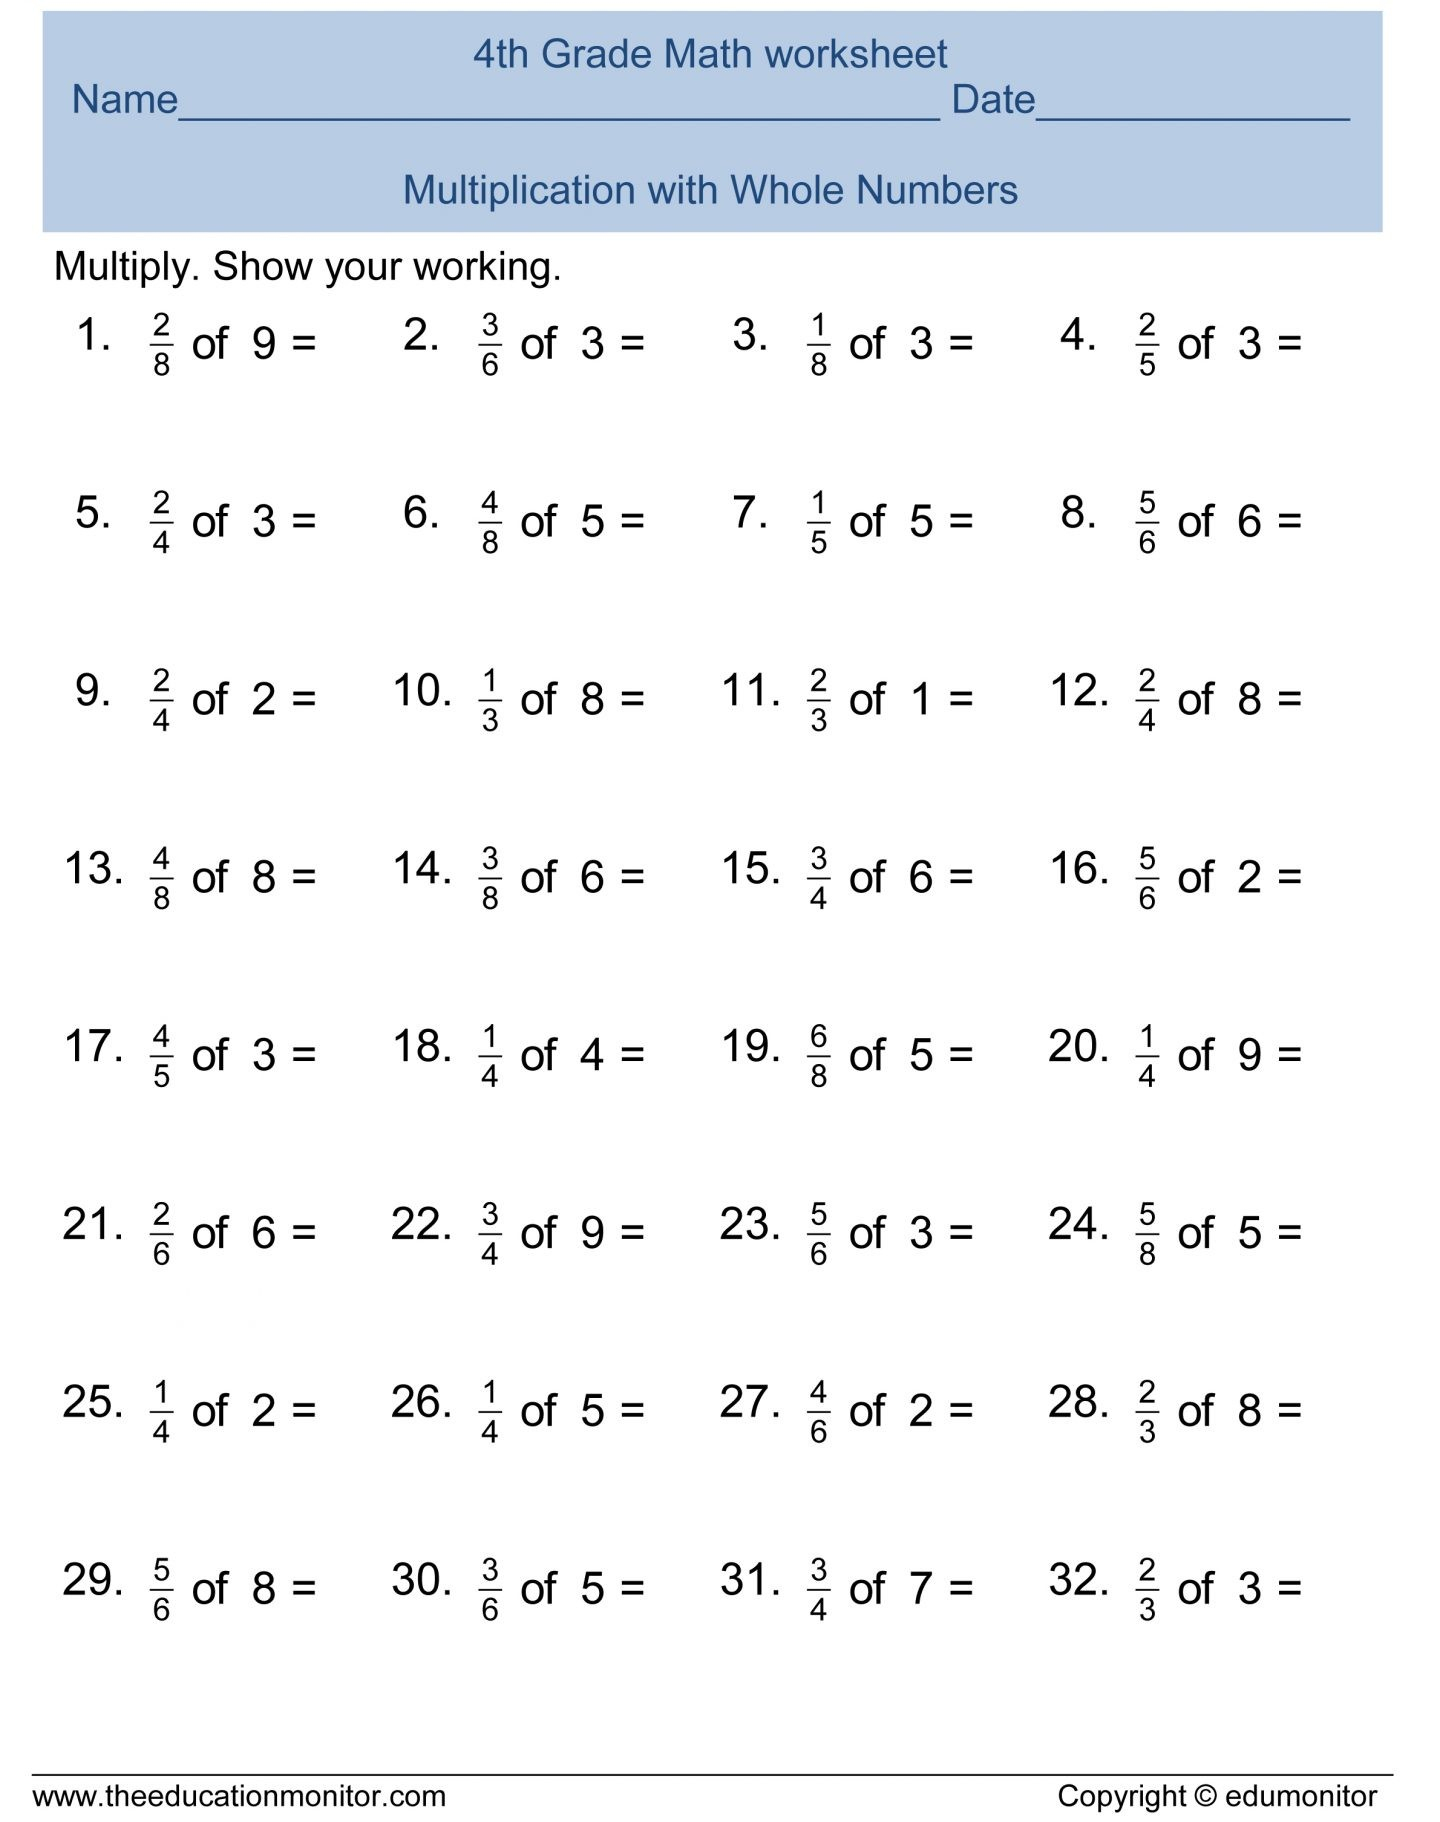 7Th Grade Math Worksheets Free Printable With Answers Stunning - 7Th Grade Math Worksheets Free Printable With Answers